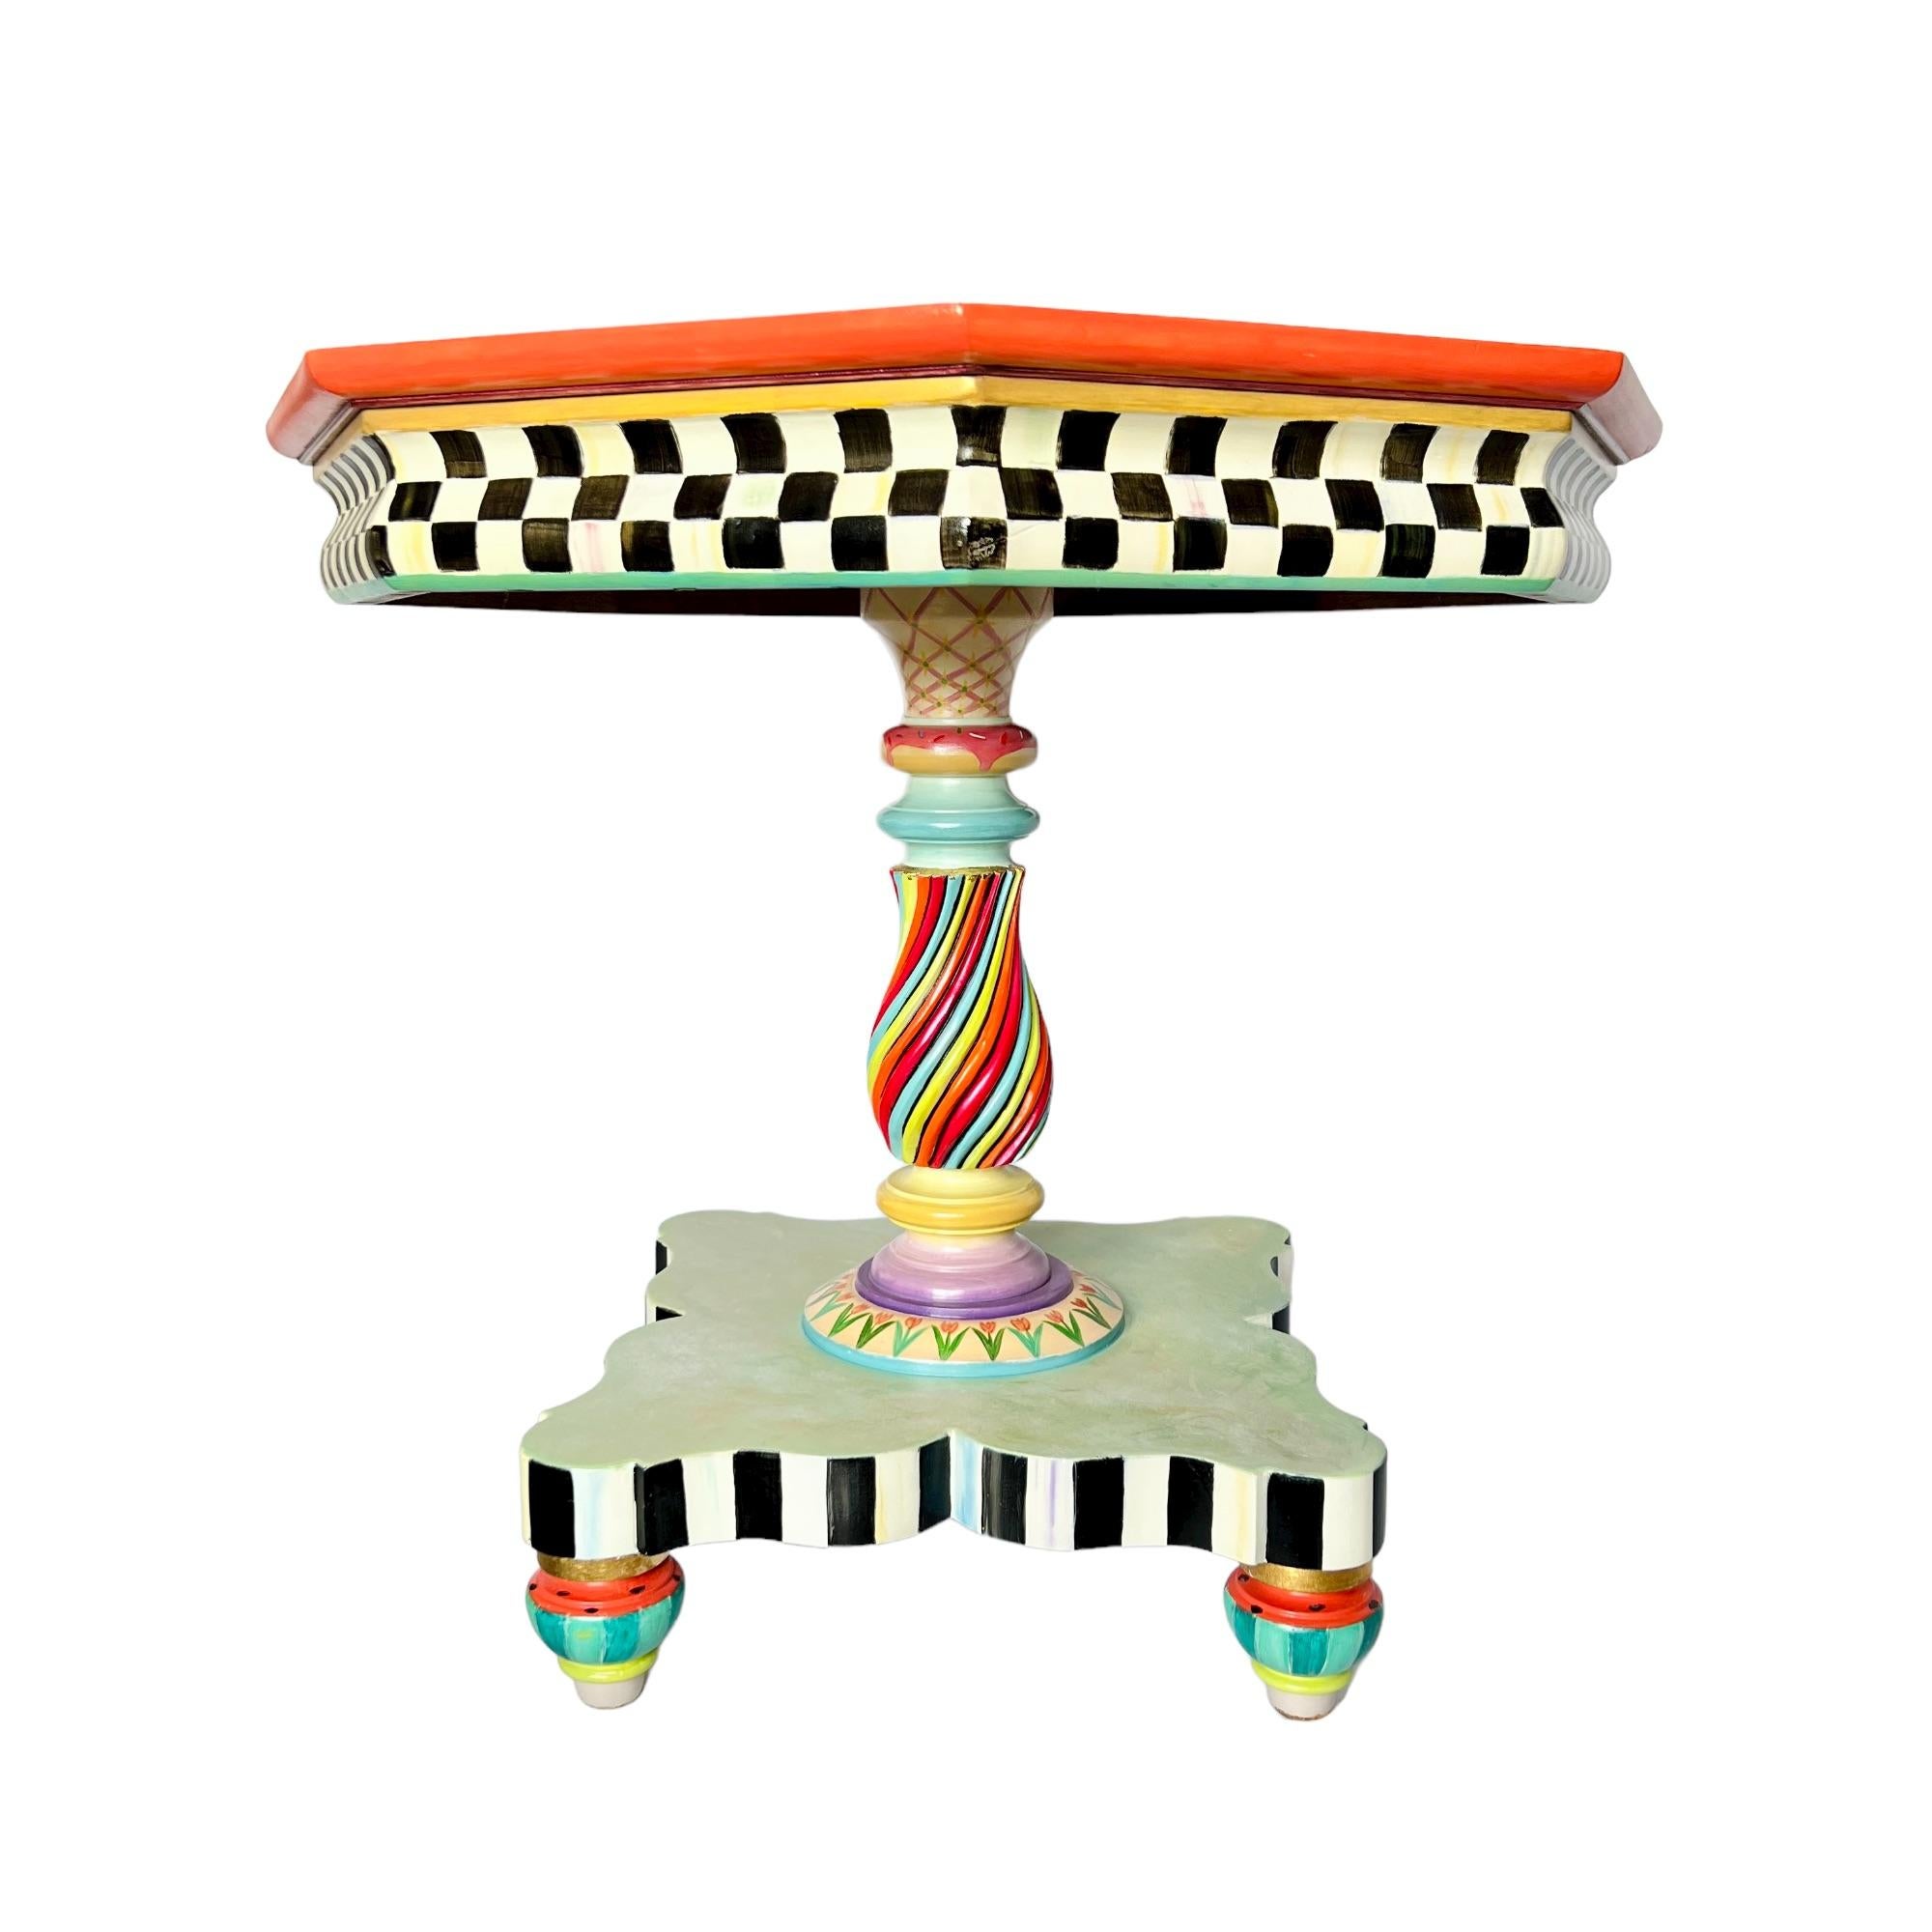 Vibrant and whimsical, this finely detailed turned wood octagon pedestal accent table has been given a one-of-a-kind hand painted update in the manner of MacKenzie-Childs. The pearly cream top features a geometric yellow, pink, green and blue flower